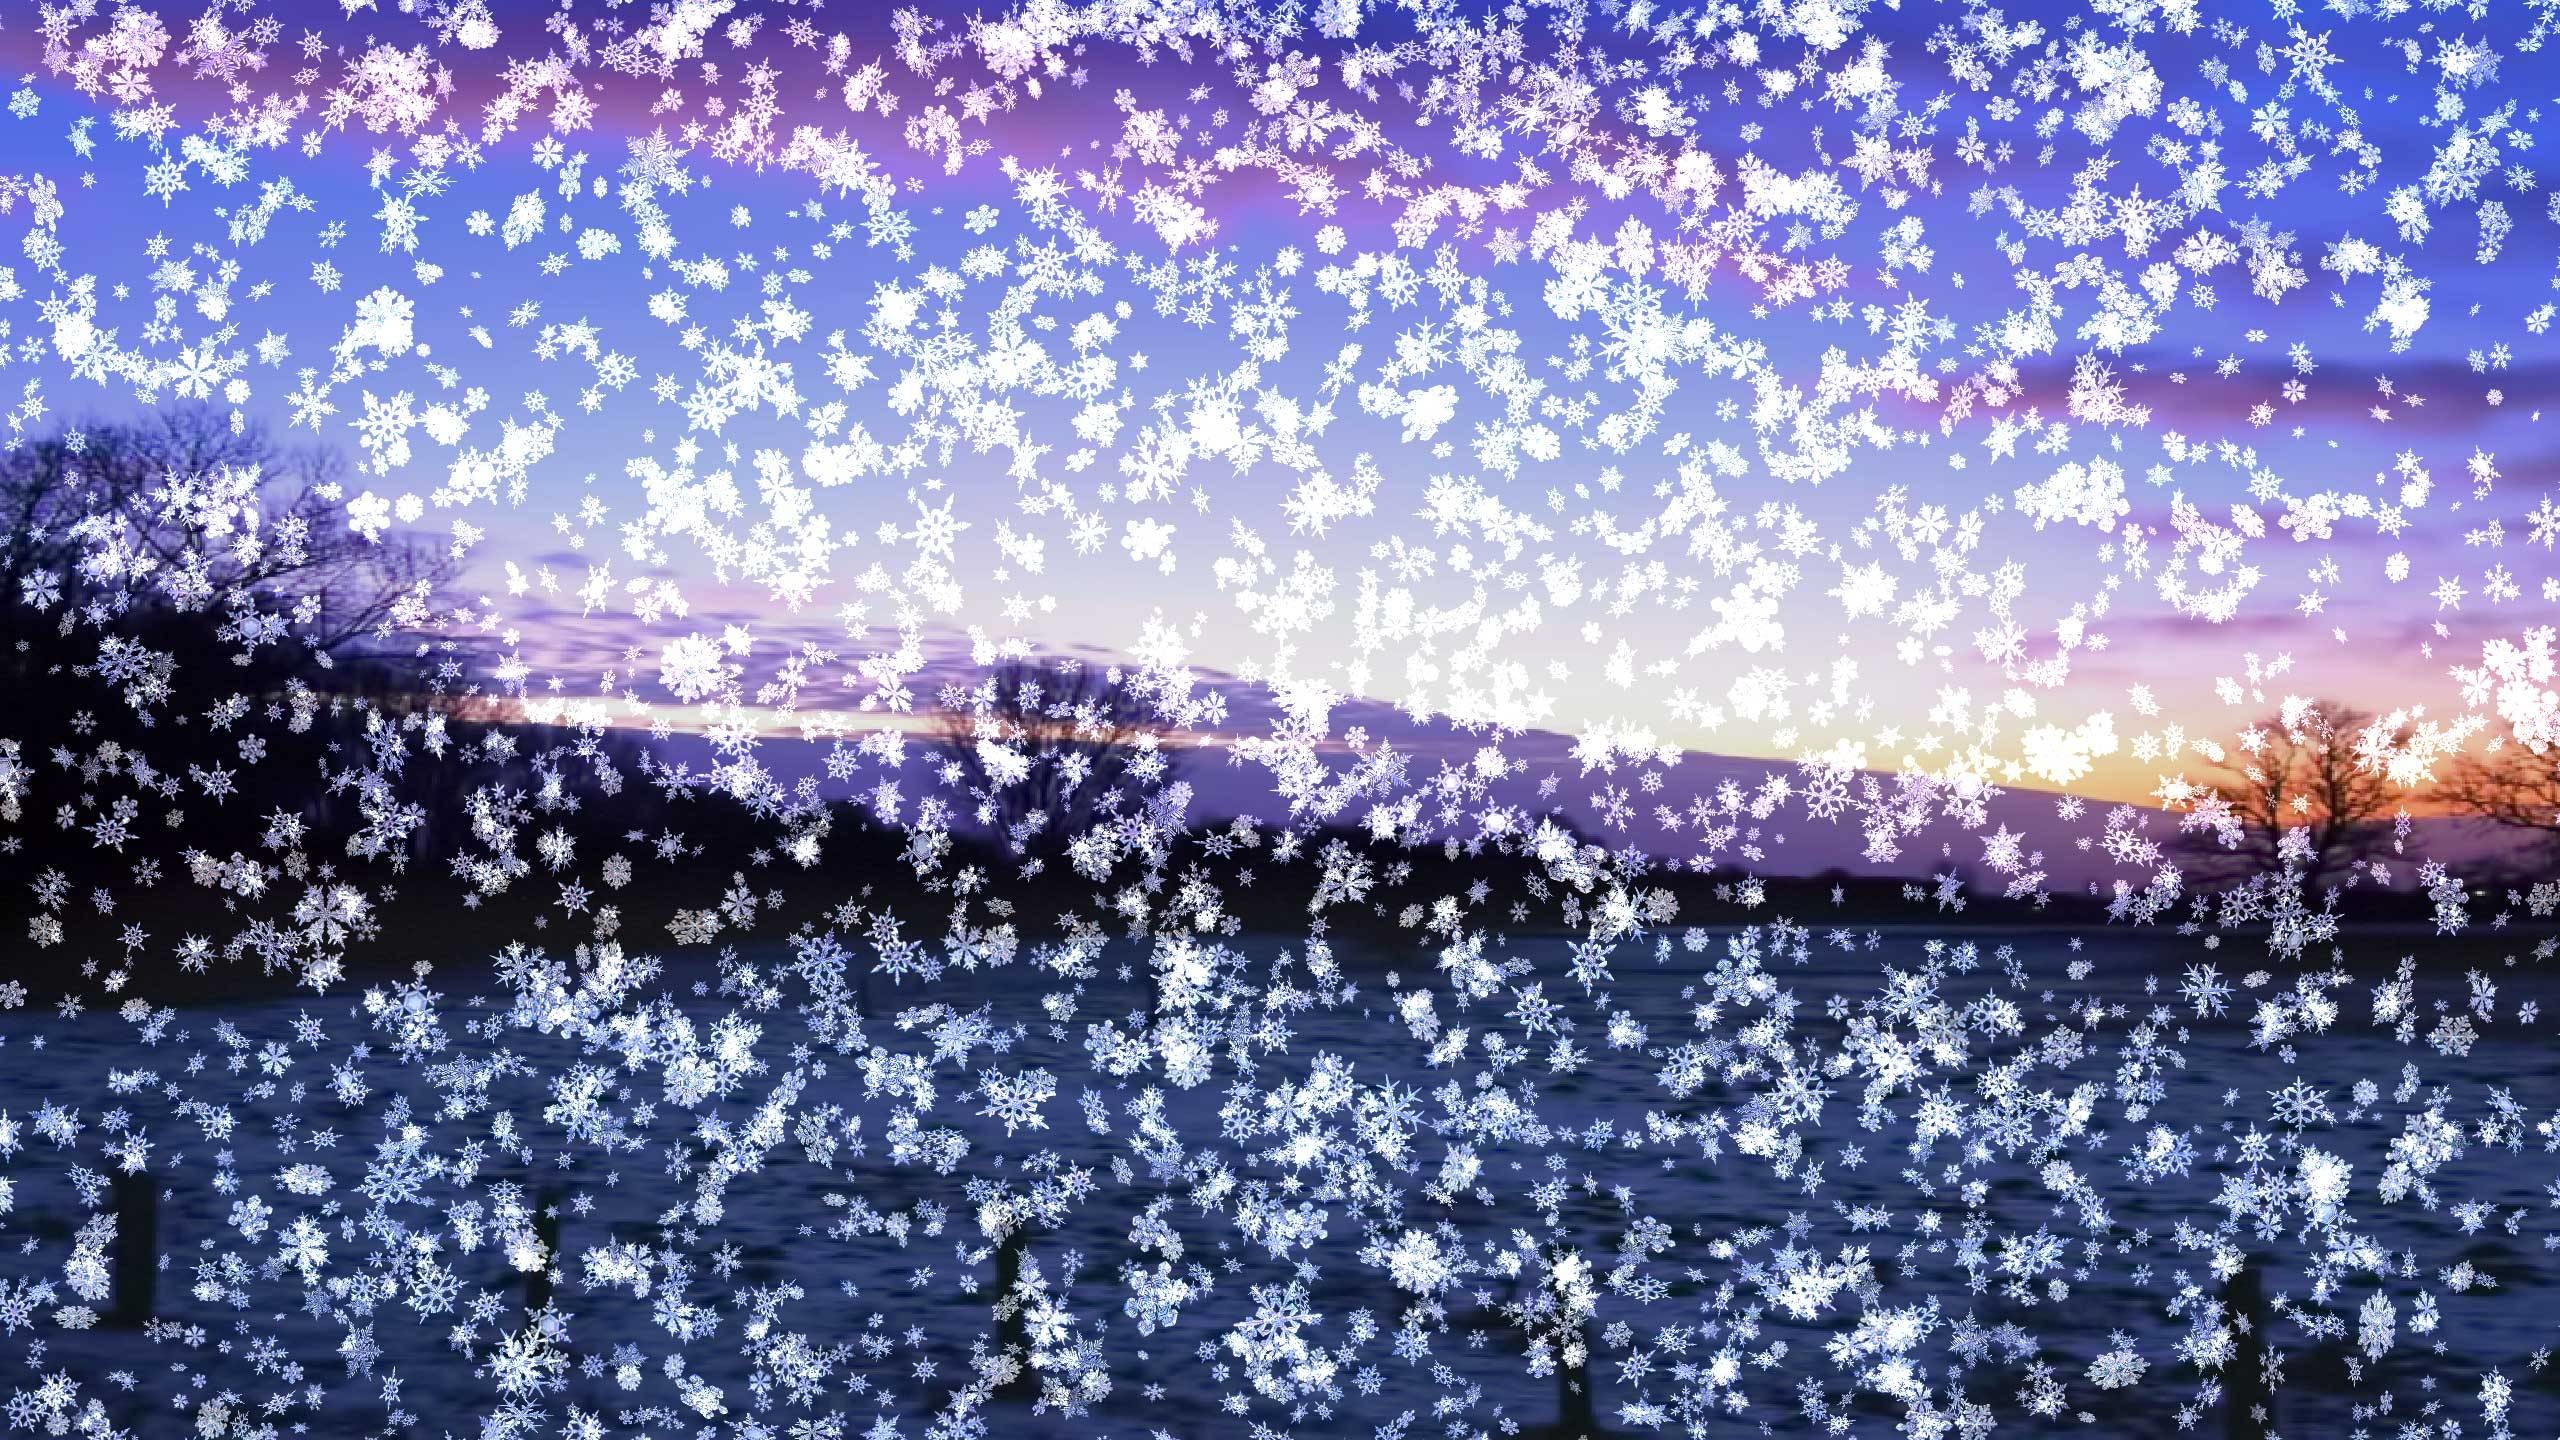 2560x1440 Live Wallpapers And Screensavers For Windows 10 8 7. Another Way To Make Snow  Falling